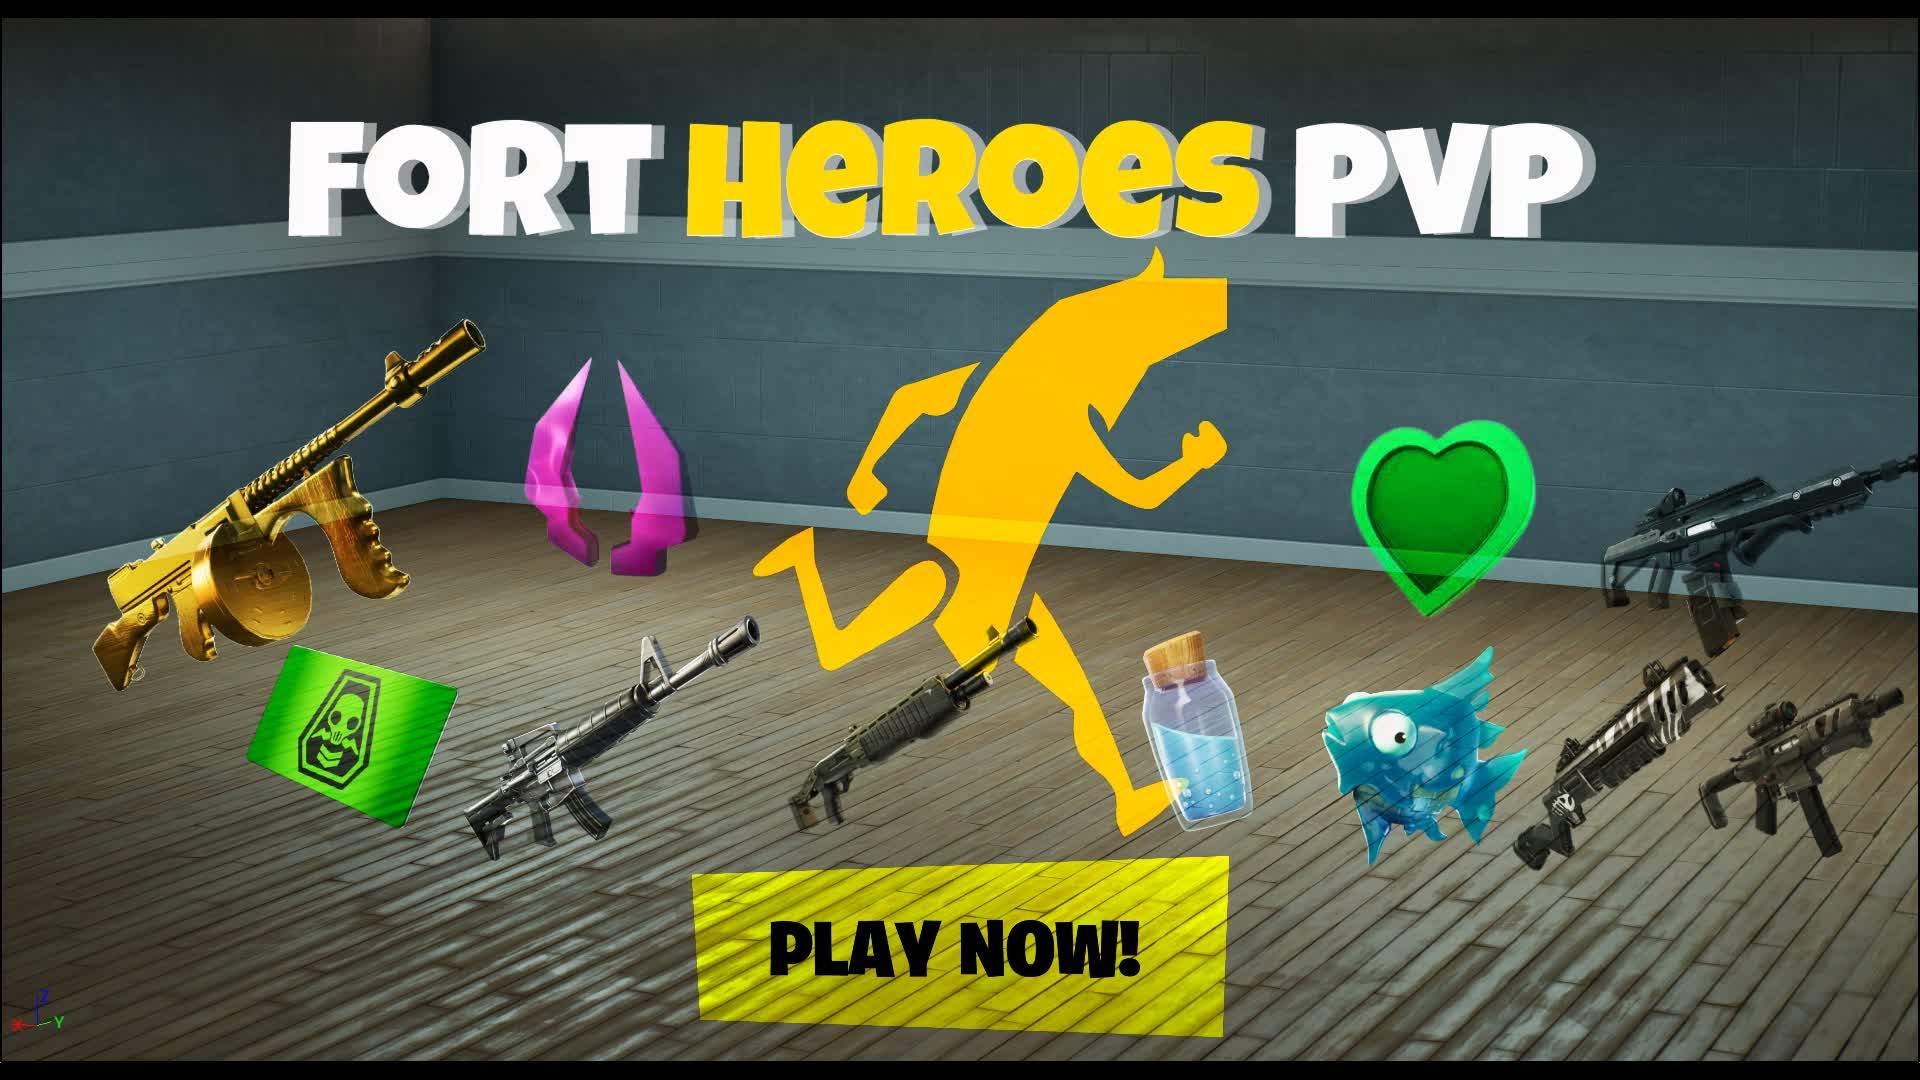 Fort Heroes PVP